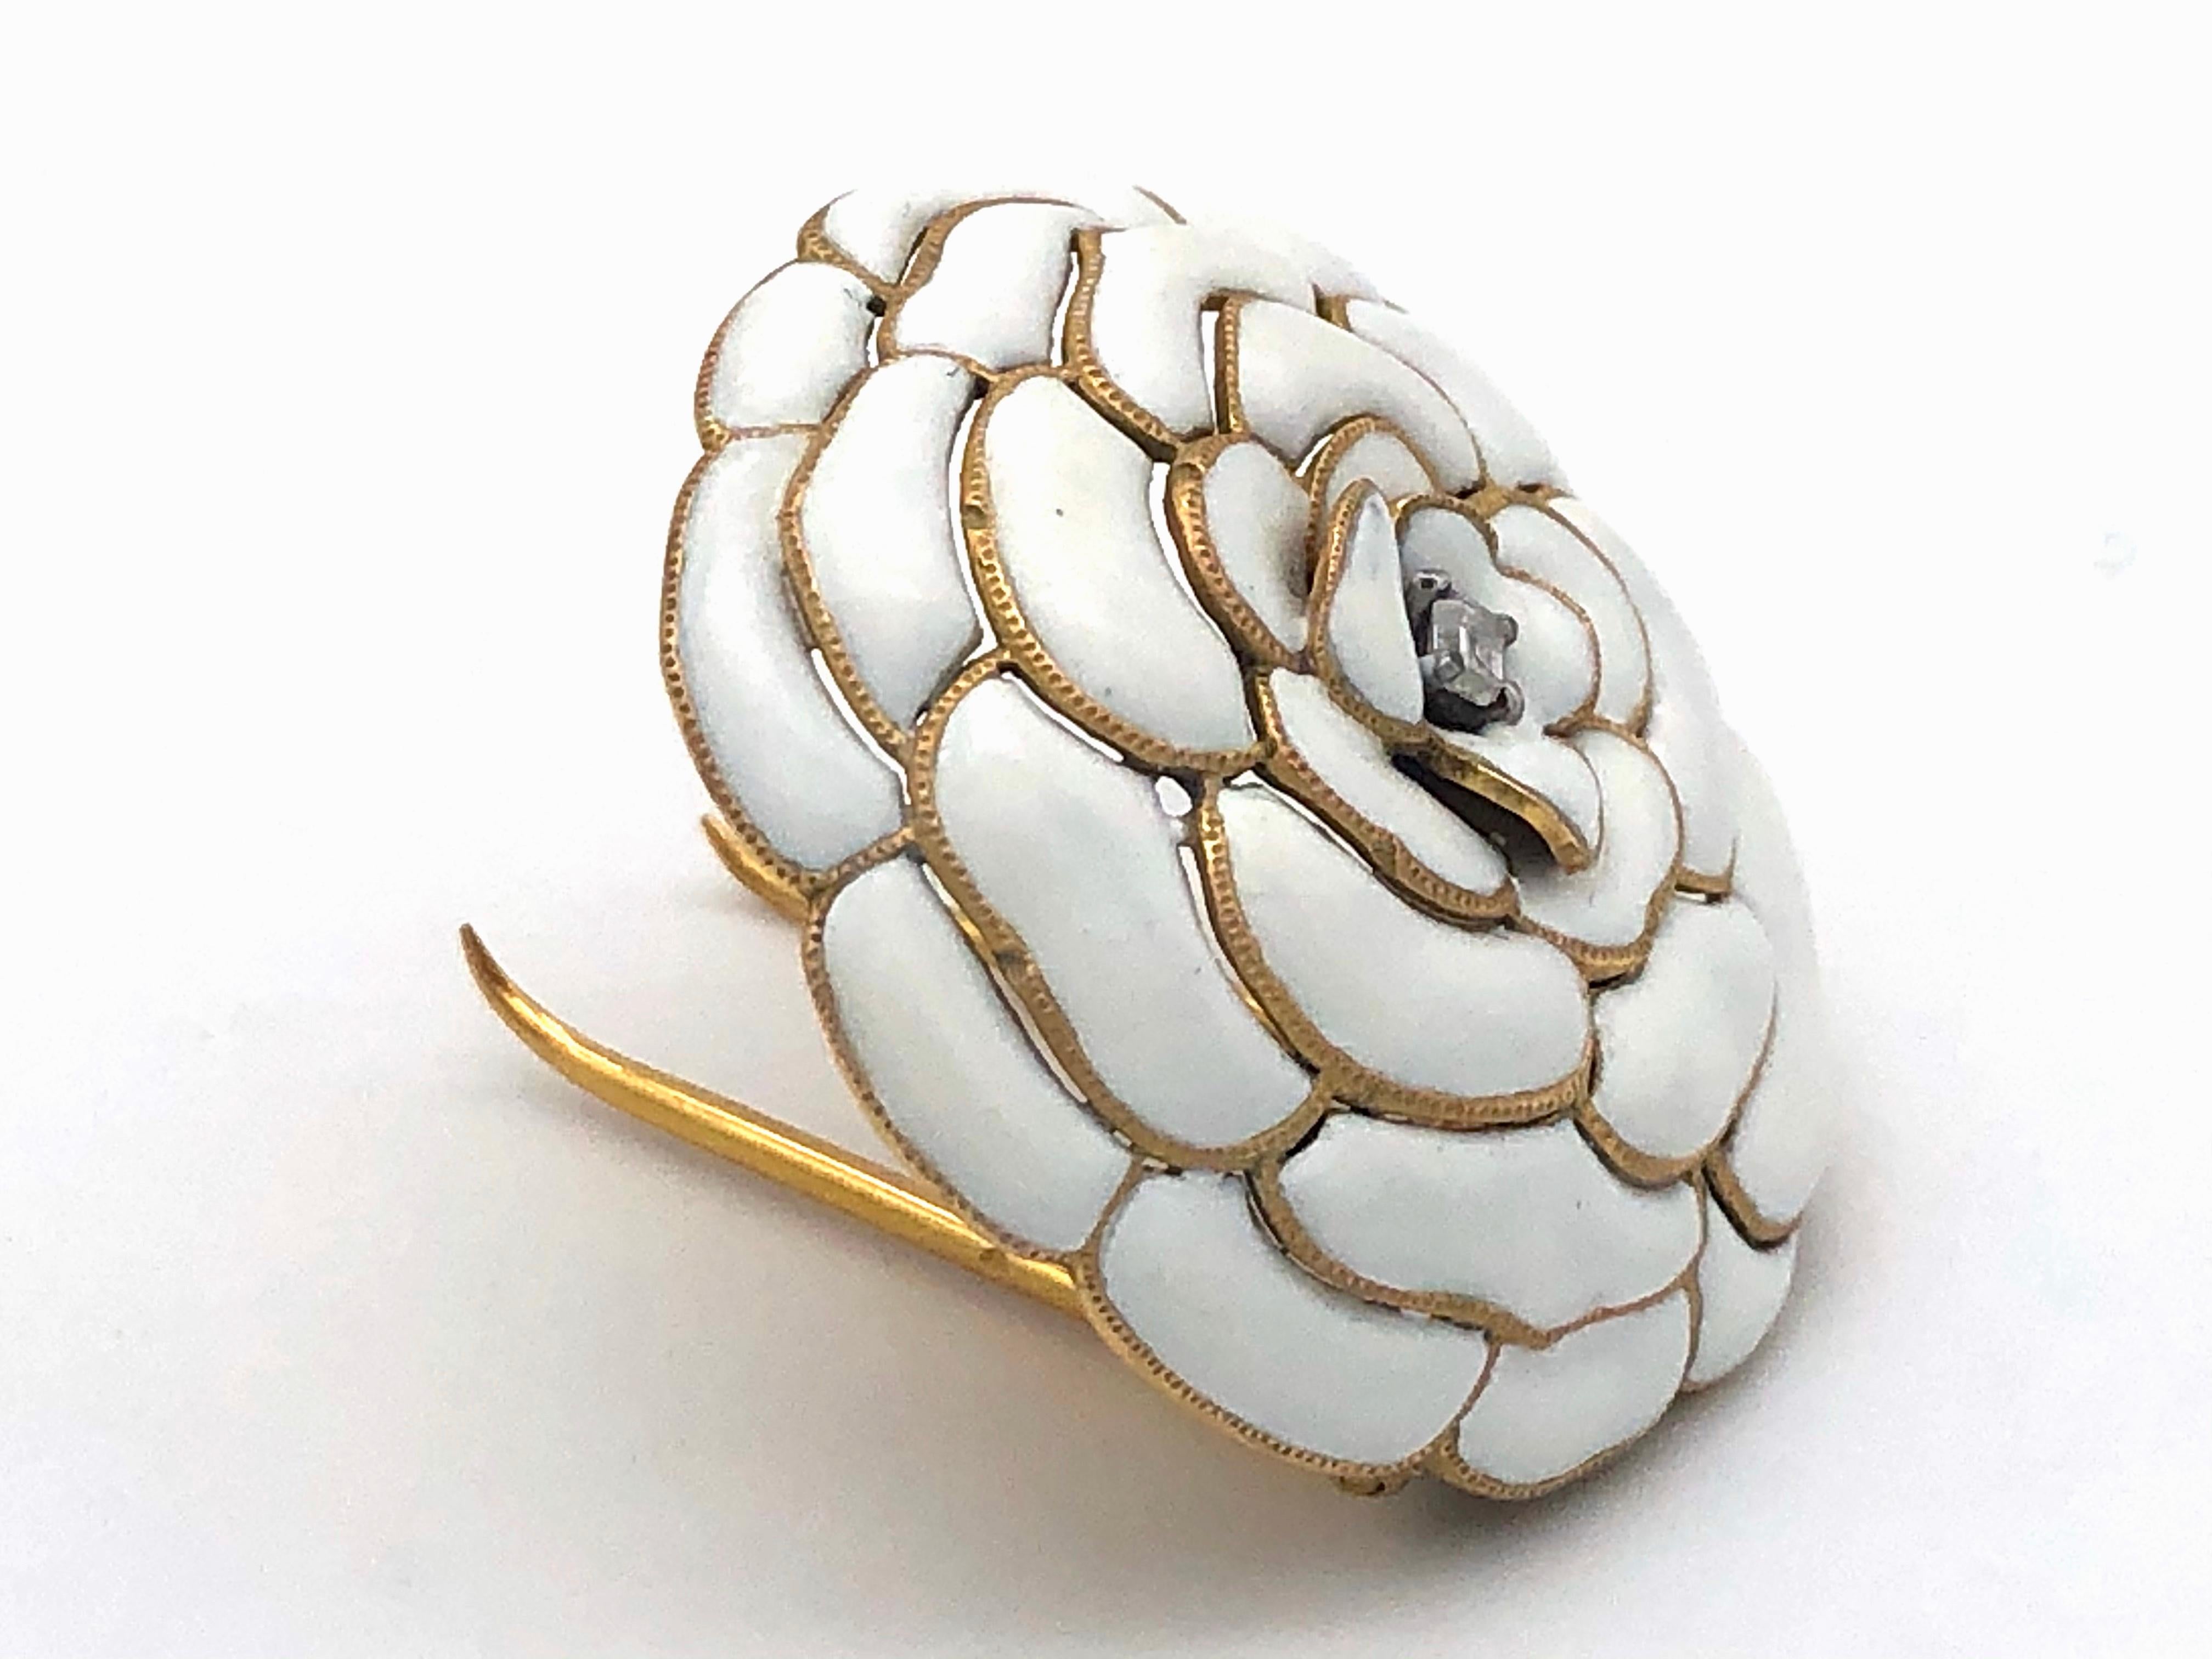 Spring feelings all year round with this stunning Cartier dressclip designed as a white camelia in full bloom.
Golden petals, painted with opaque white enamel, are arranged around a rectangular diamond held by four platinum claws. The petals have a